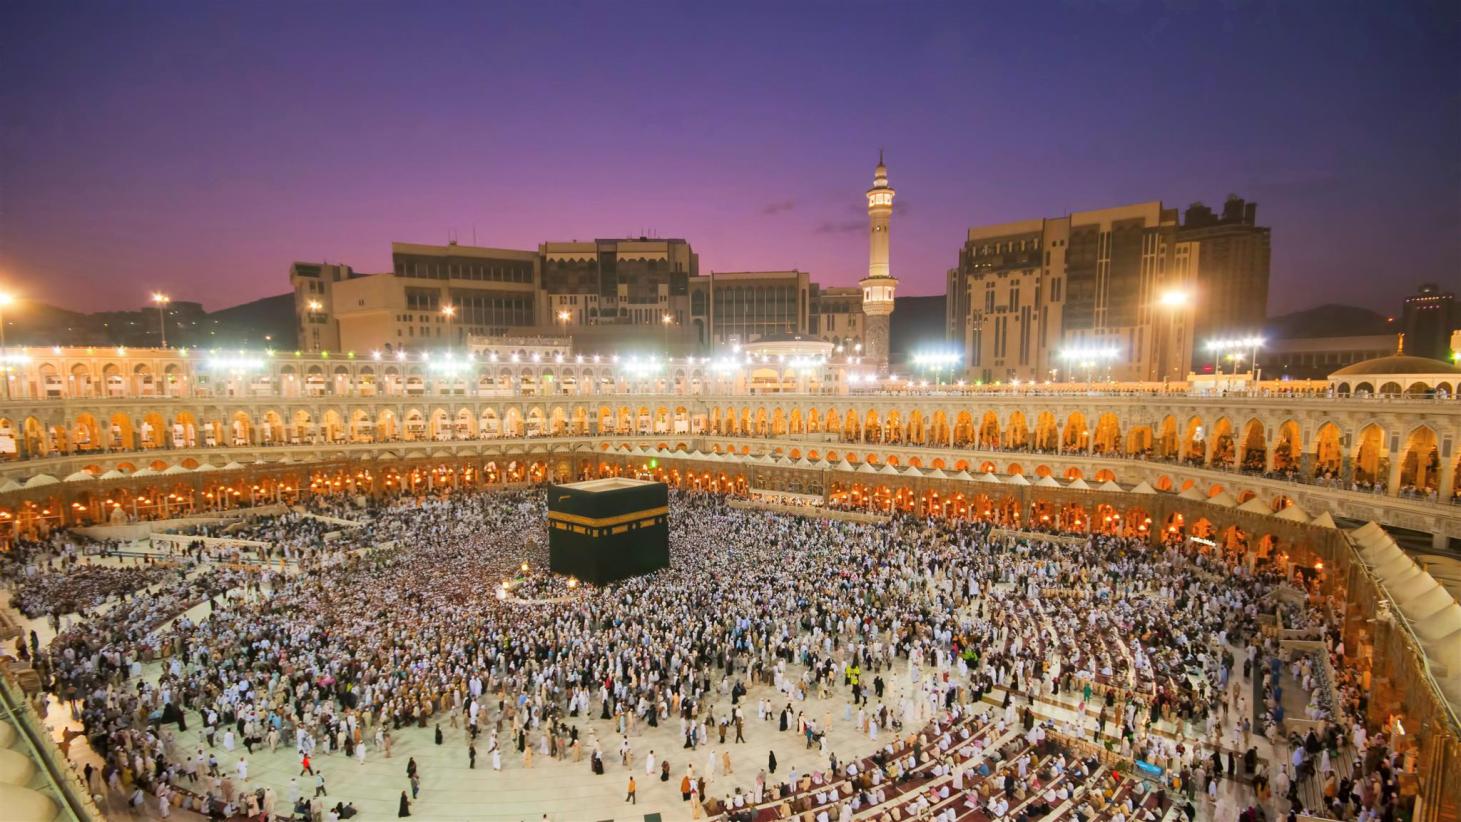 Can You Guess Countries Are by 3 Clues I Give You? Quiz Kaaba, Mecca pilgrimage, Saudi Arabia